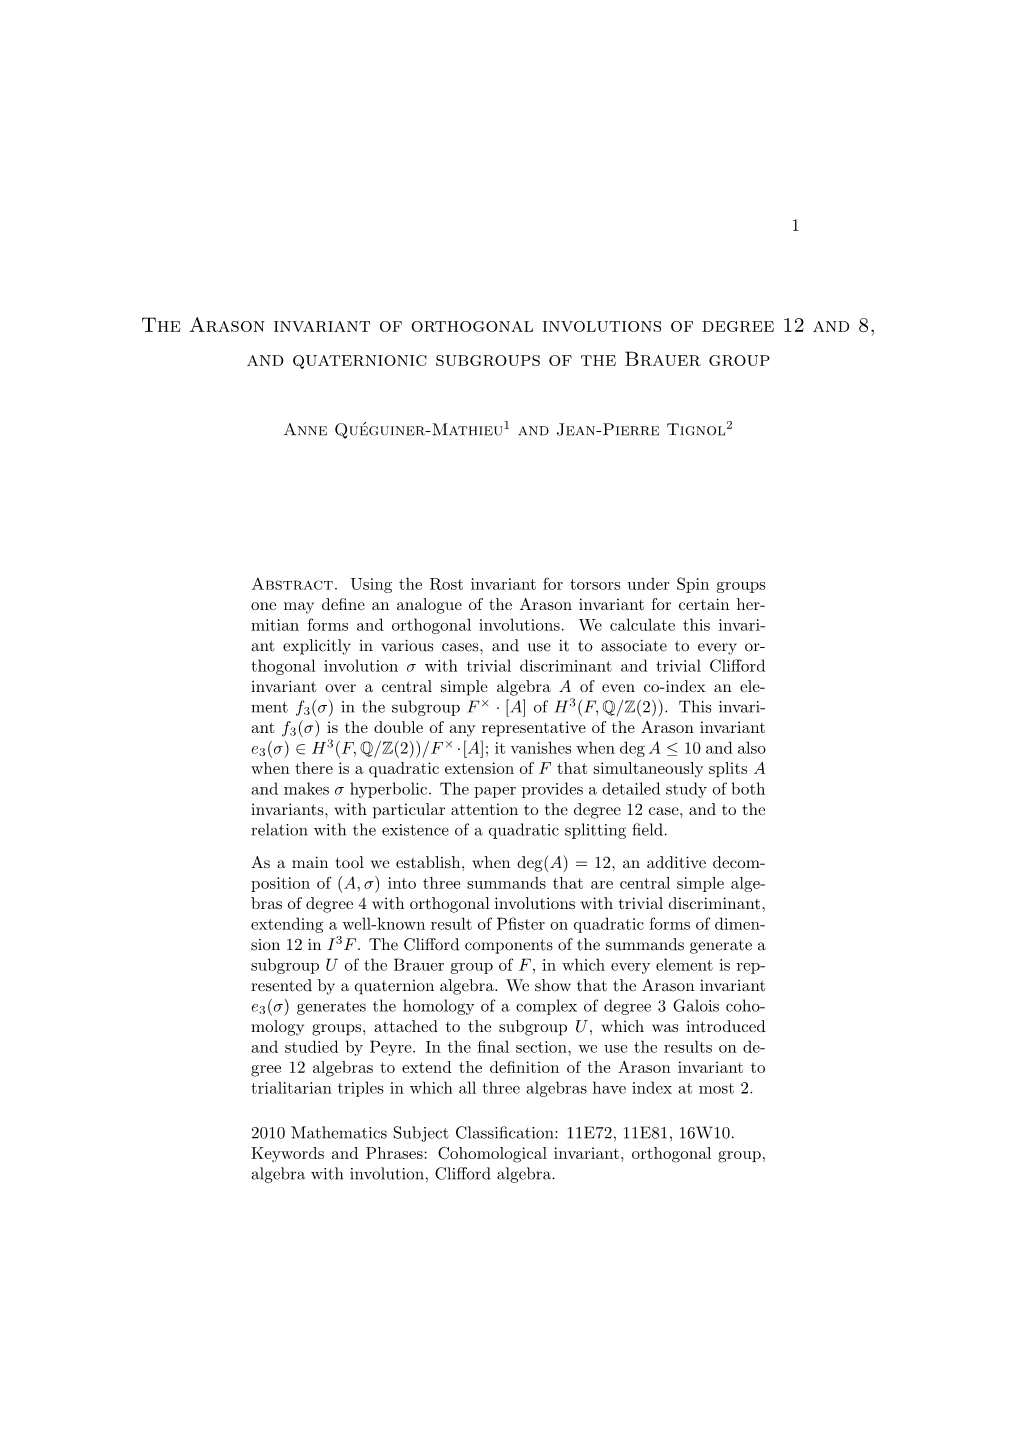 The Arason Invariant of Orthogonal Involutions of Degree 12 and 8, and Quaternionic Subgroups of the Brauer Group